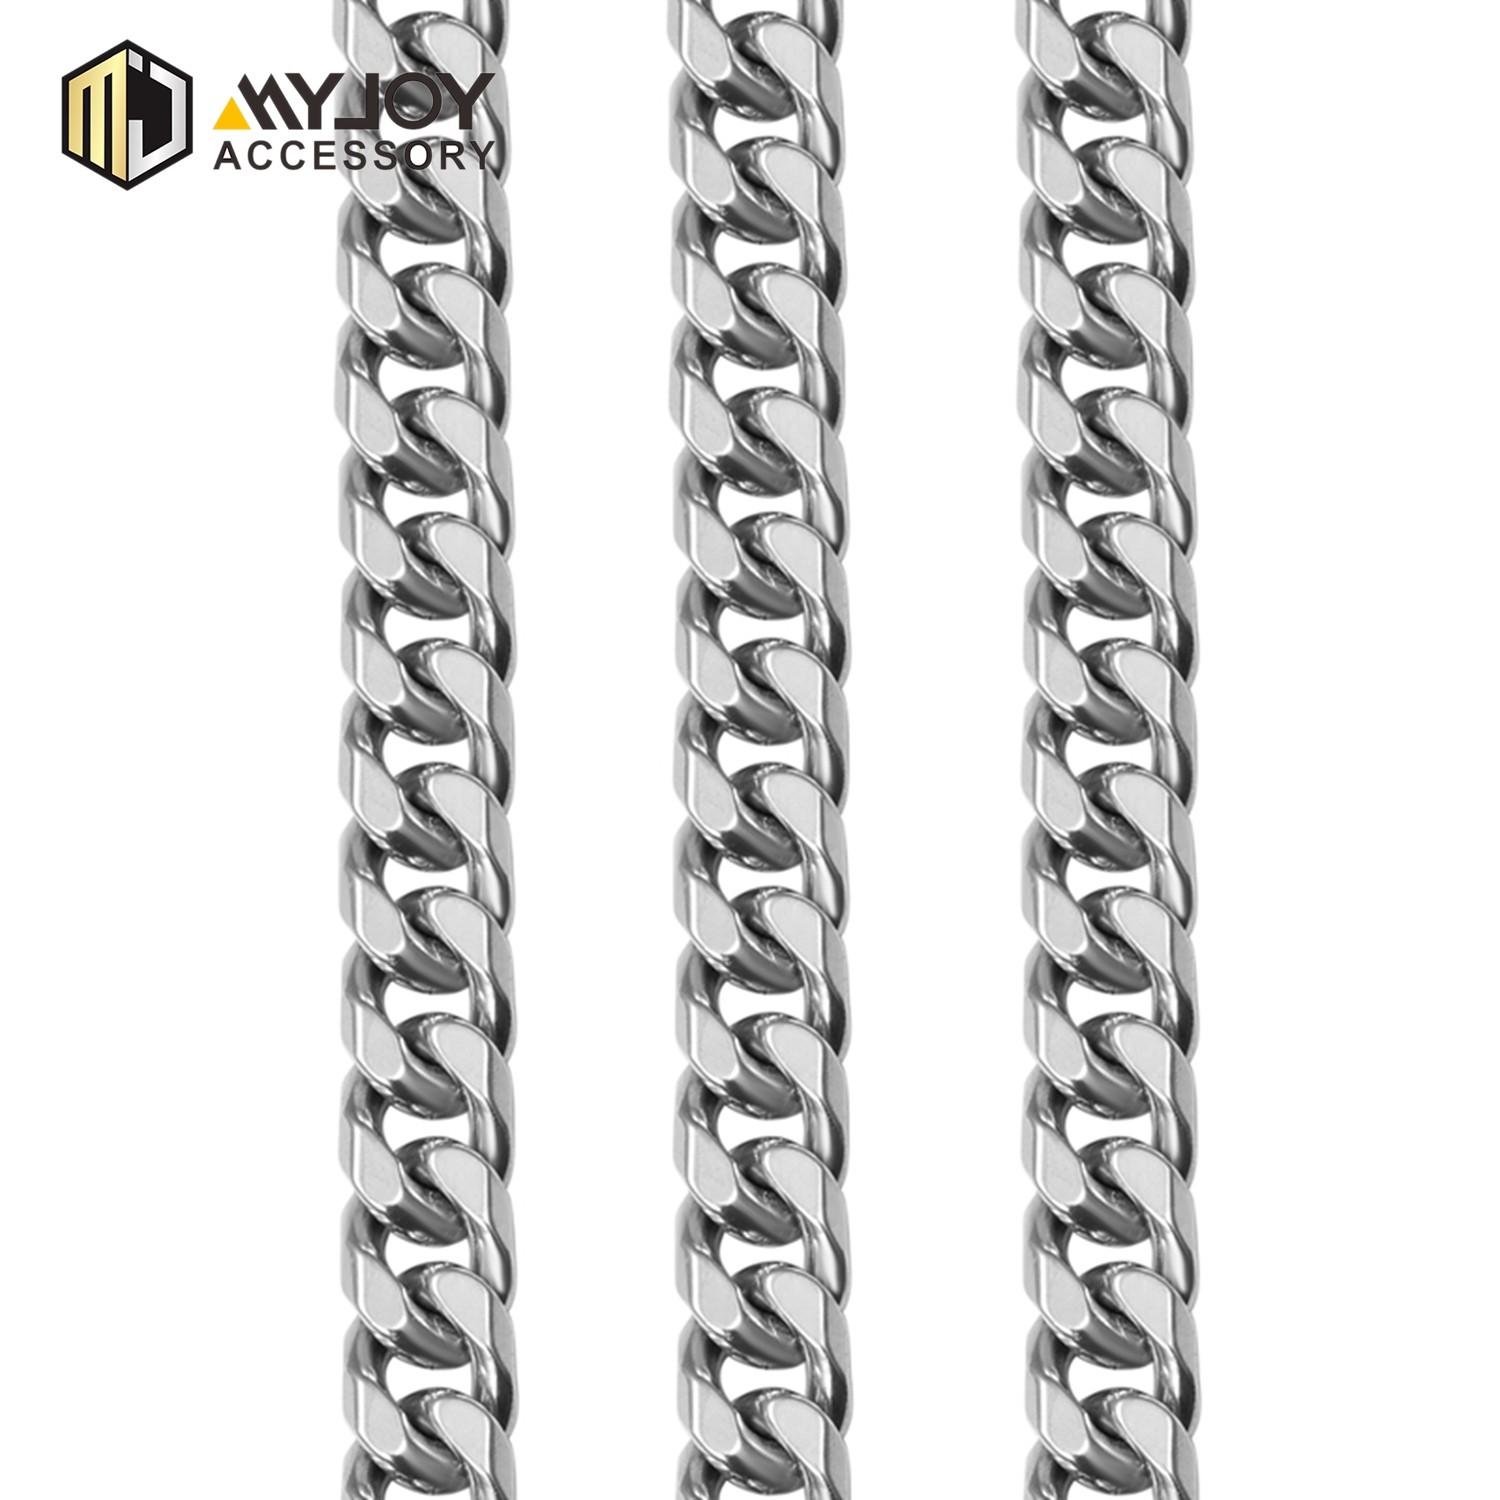 MYJOY Wholesale strap chain Suppliers for handbag